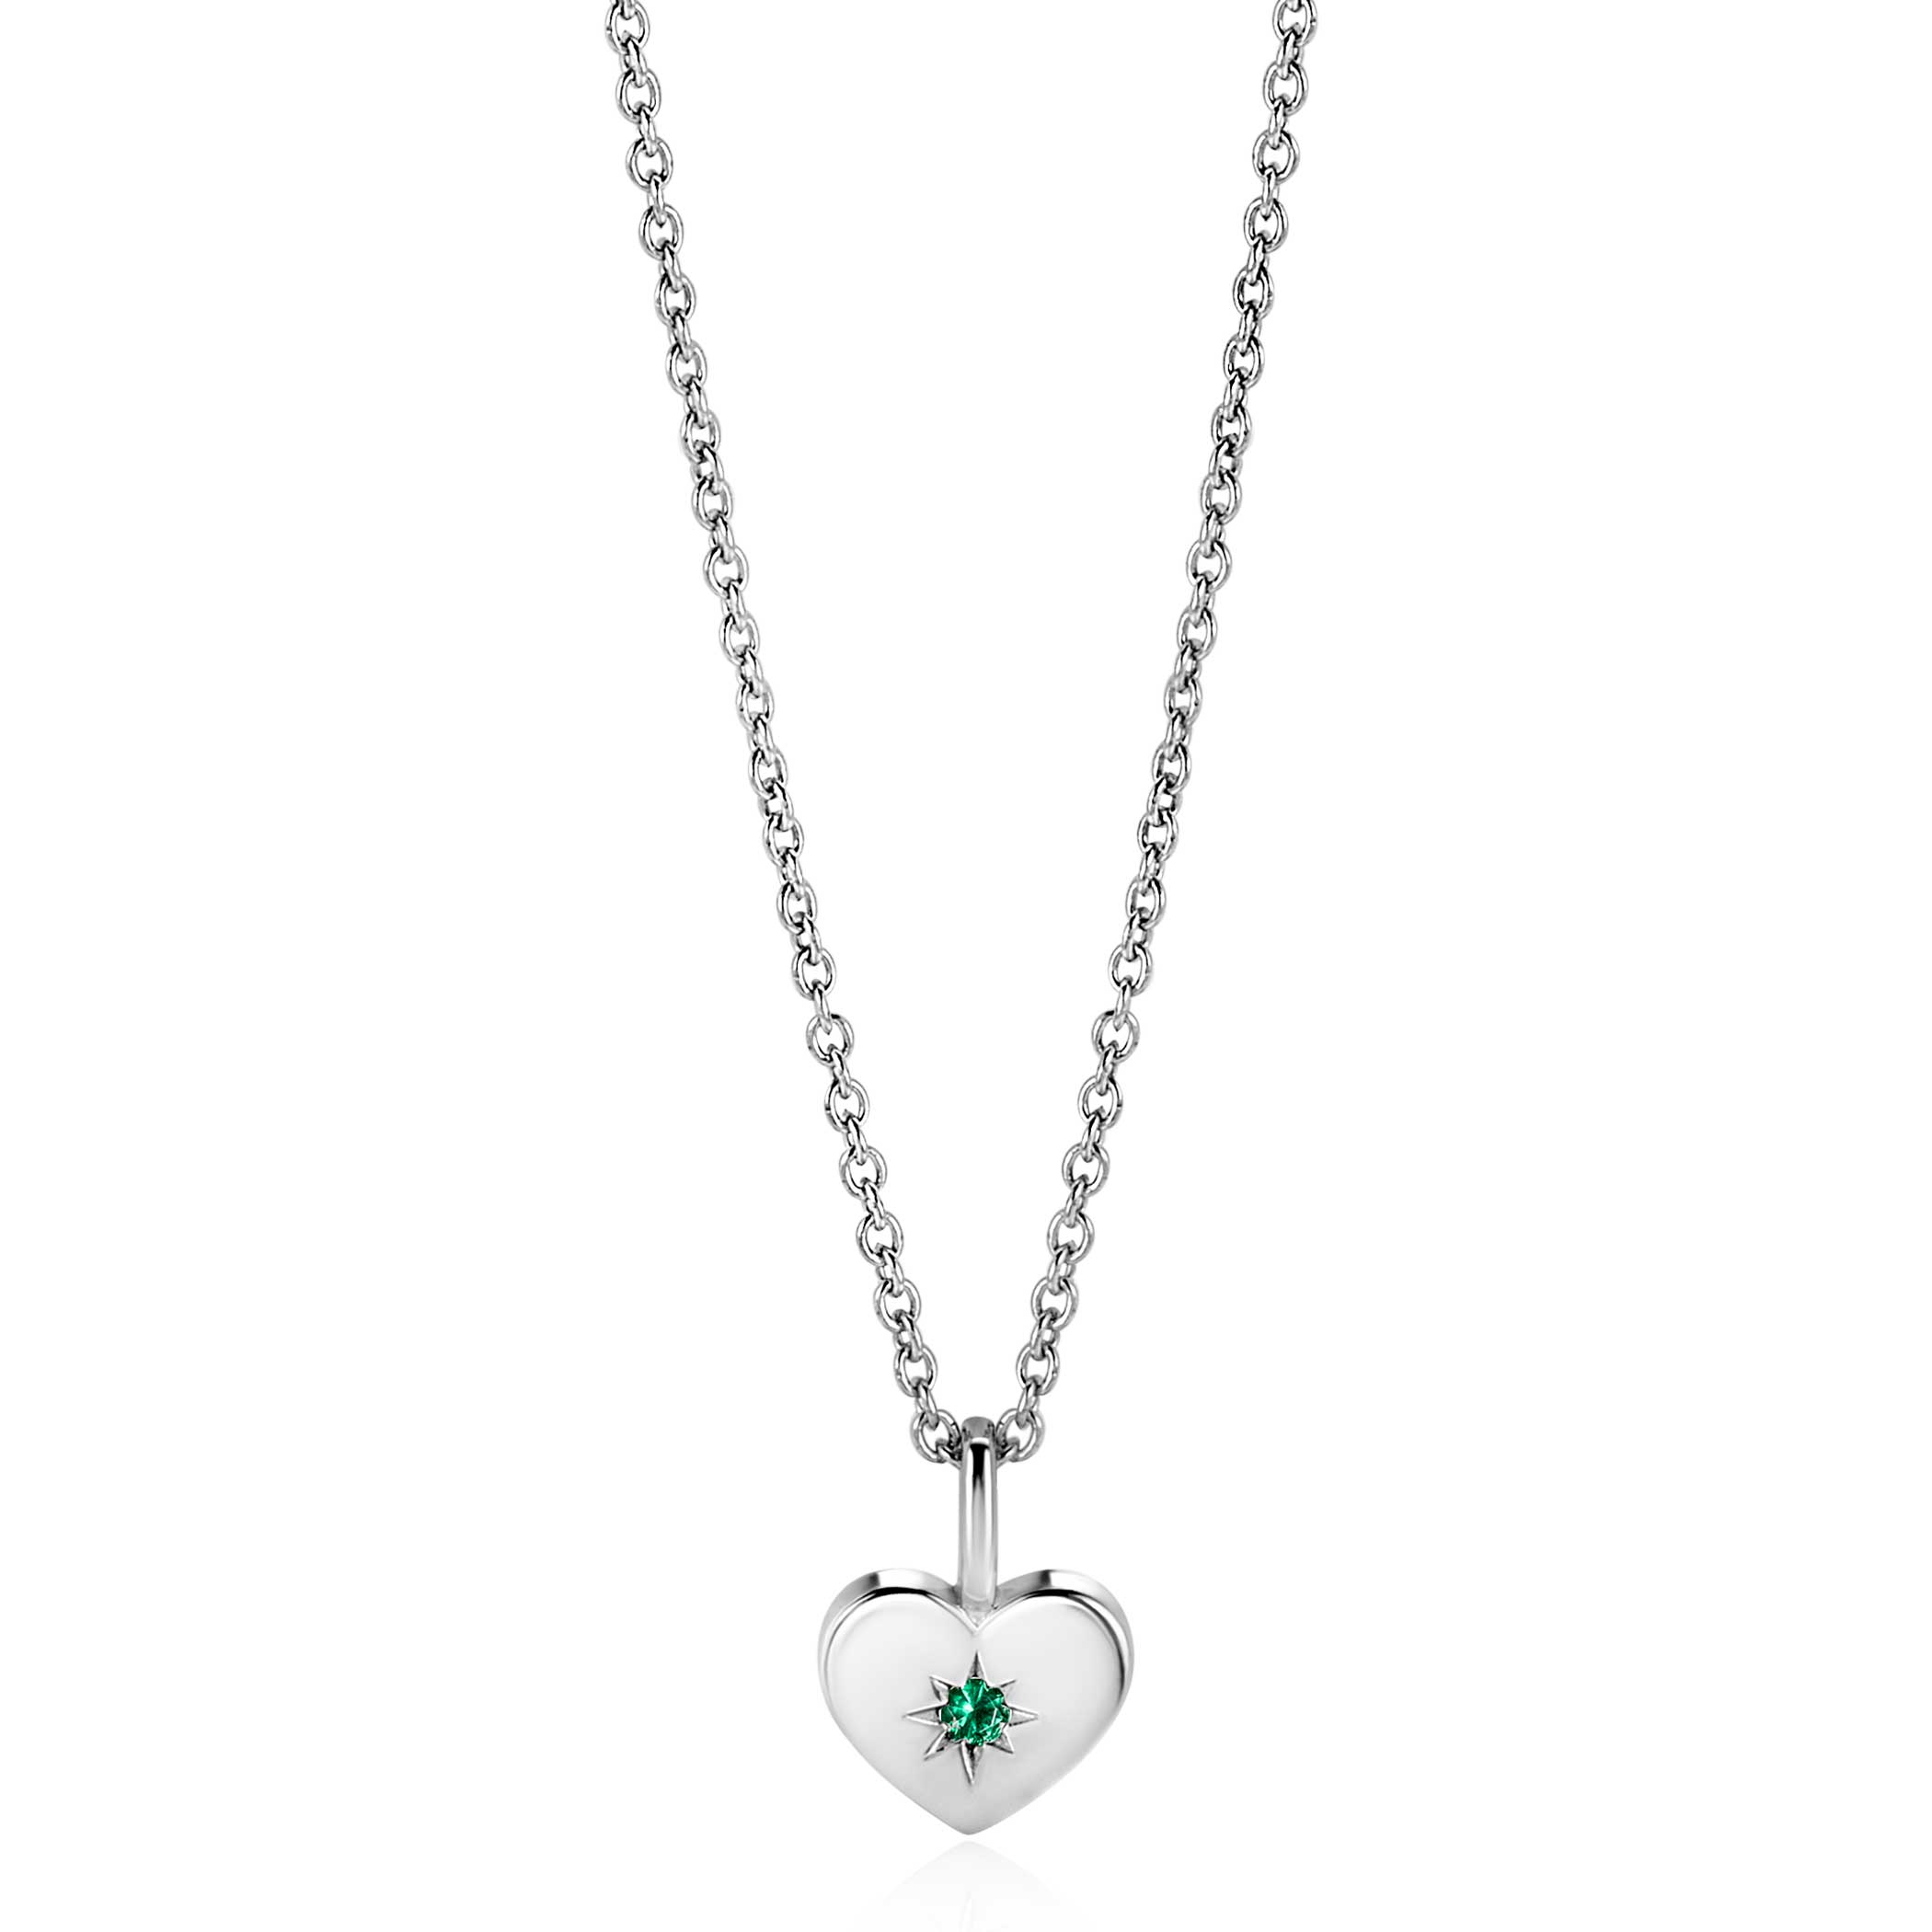 MAY Pendant 12mm Sterling Silver Heart Birthstone Green Emerald Zirconia (excl. necklace)